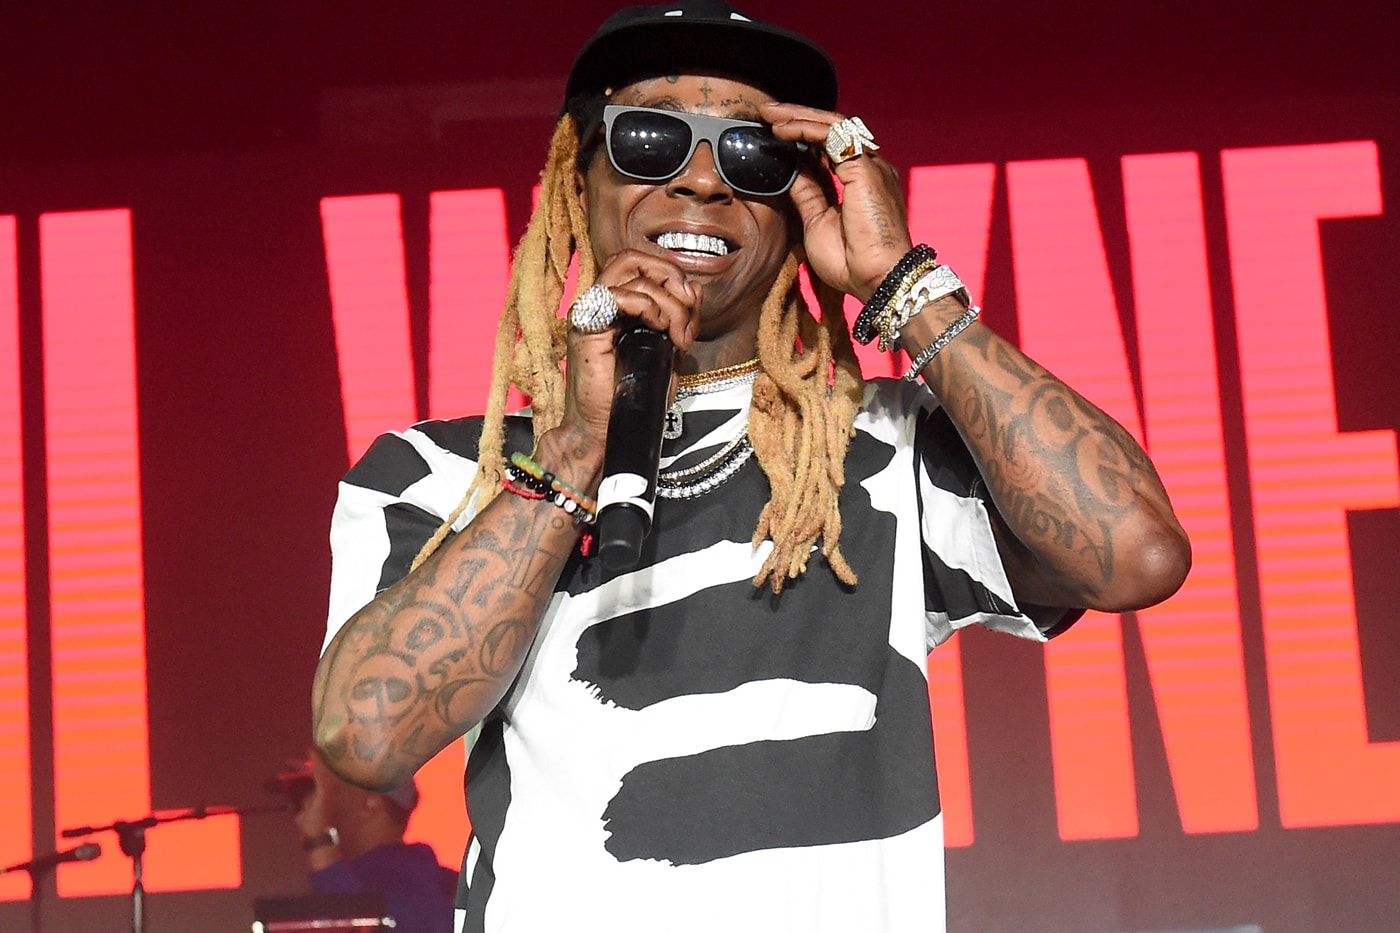 lil-wayne-suffers-seizure-while-flying-forces-emergency-landing